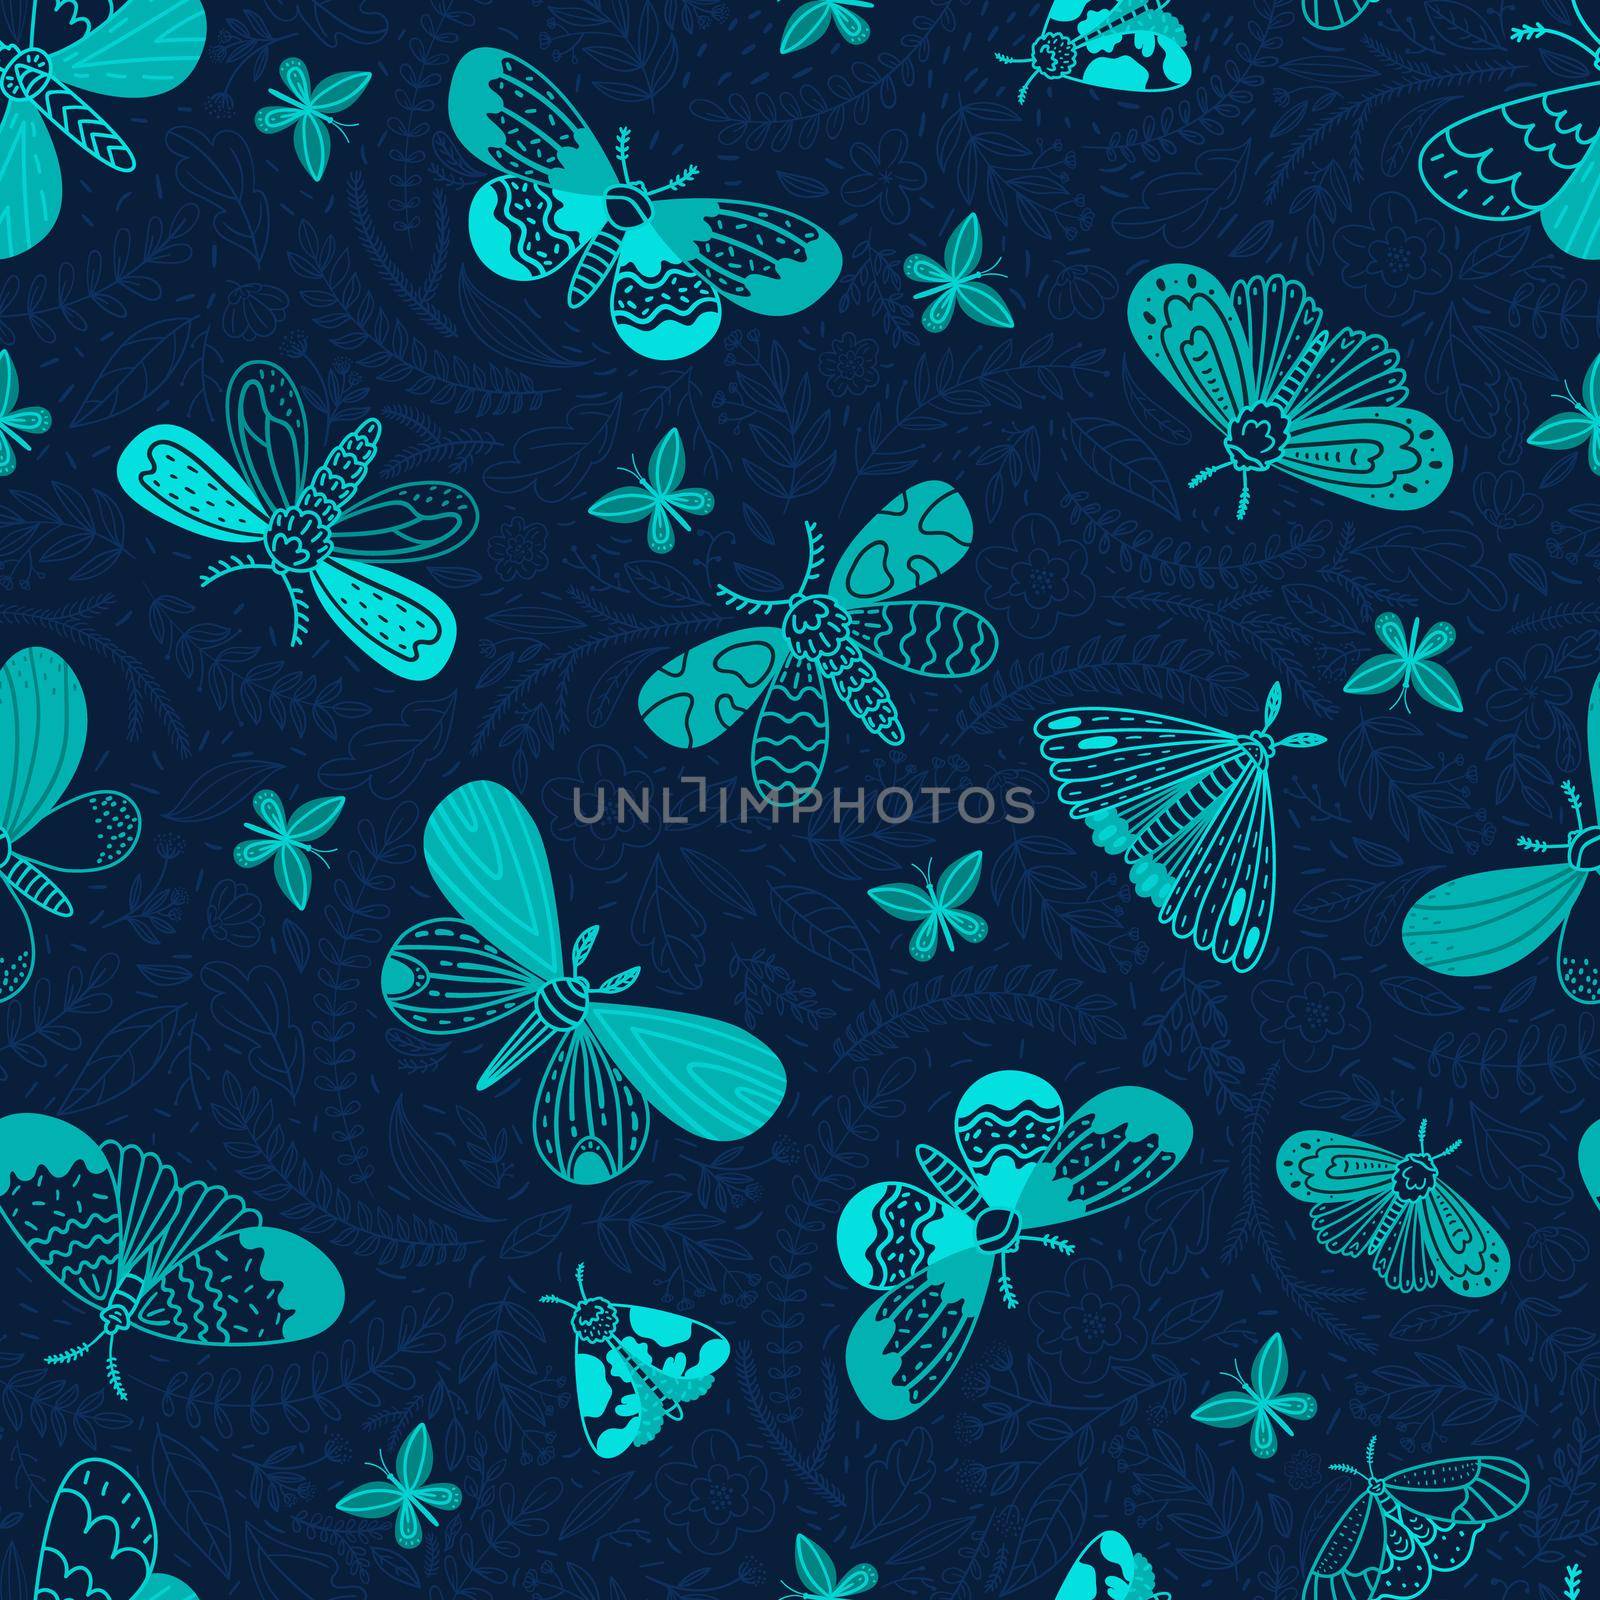 Night moths. Seamless pattern in doodle style. Night butterflies, leaves and flowers on a dark blue background. by Lena_Khmelniuk